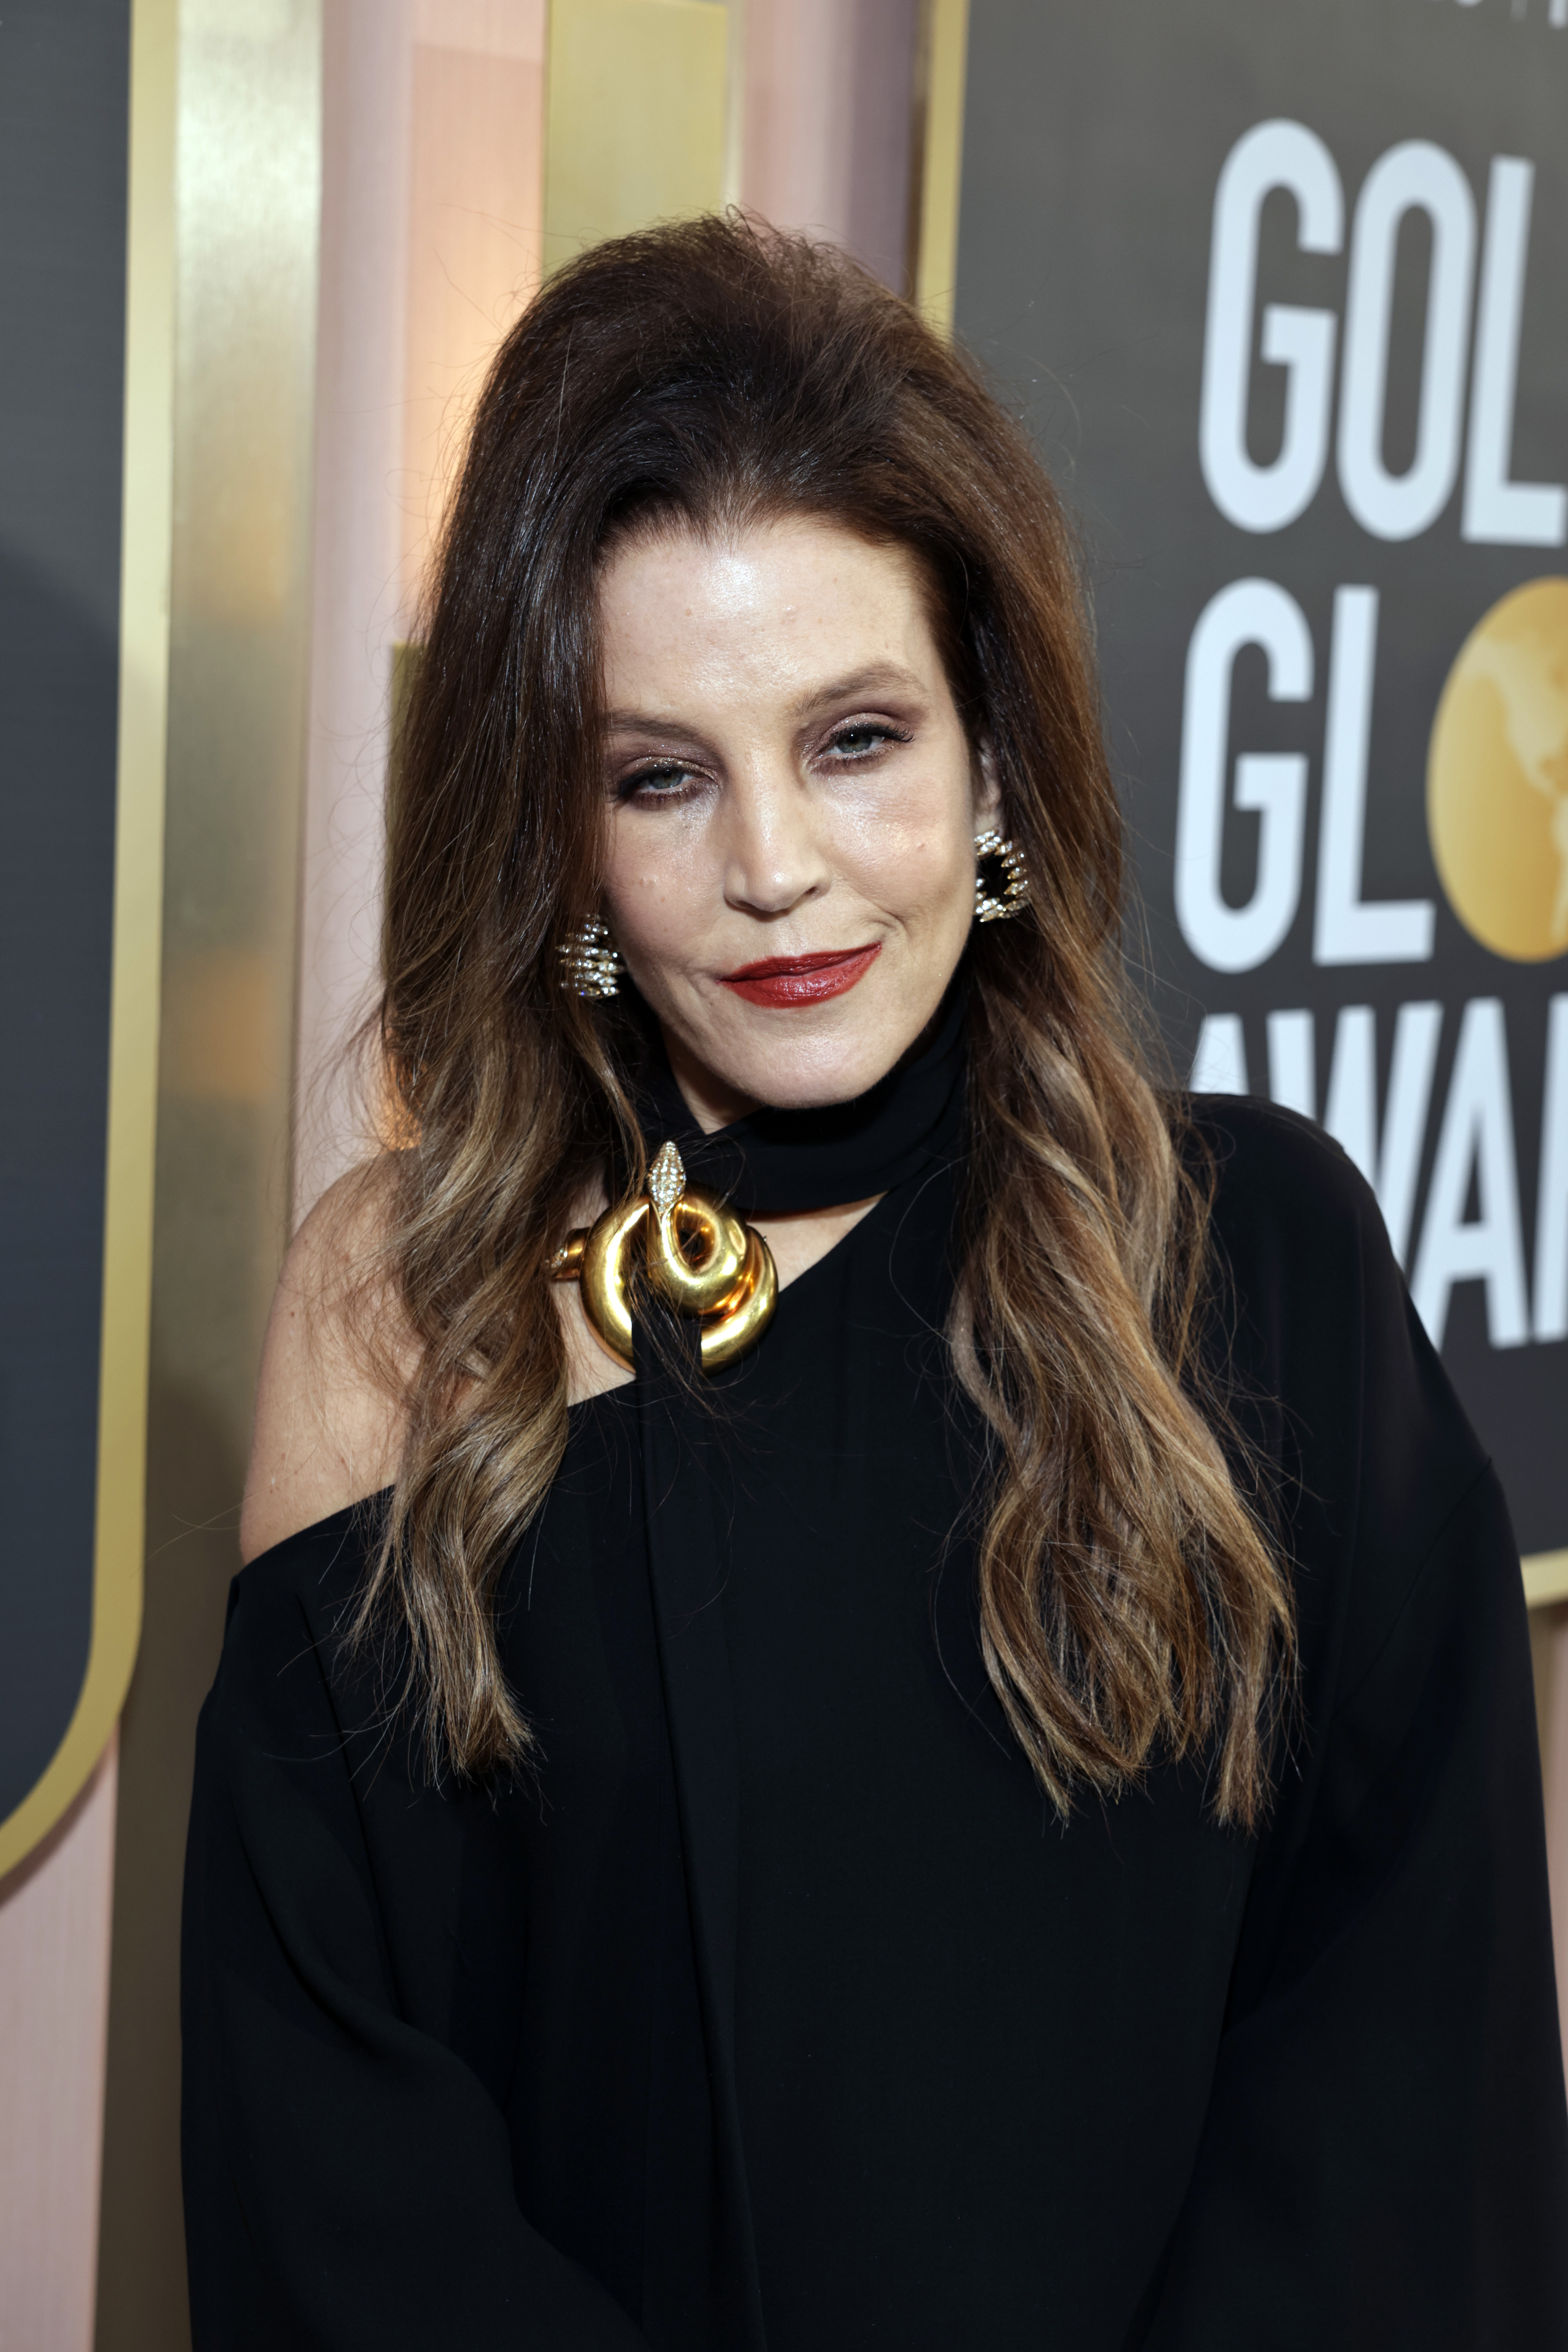 JANUARY 10: 80th Annual GOLDEN GLOBE AWARDS -- Pictured: Lisa Marie Presley arrives at the 80th Annual Golden Globe Awards held at the Beverly Hilton Hotel on January 10, 2023 in Beverly Hills, California | Source: Getty Images